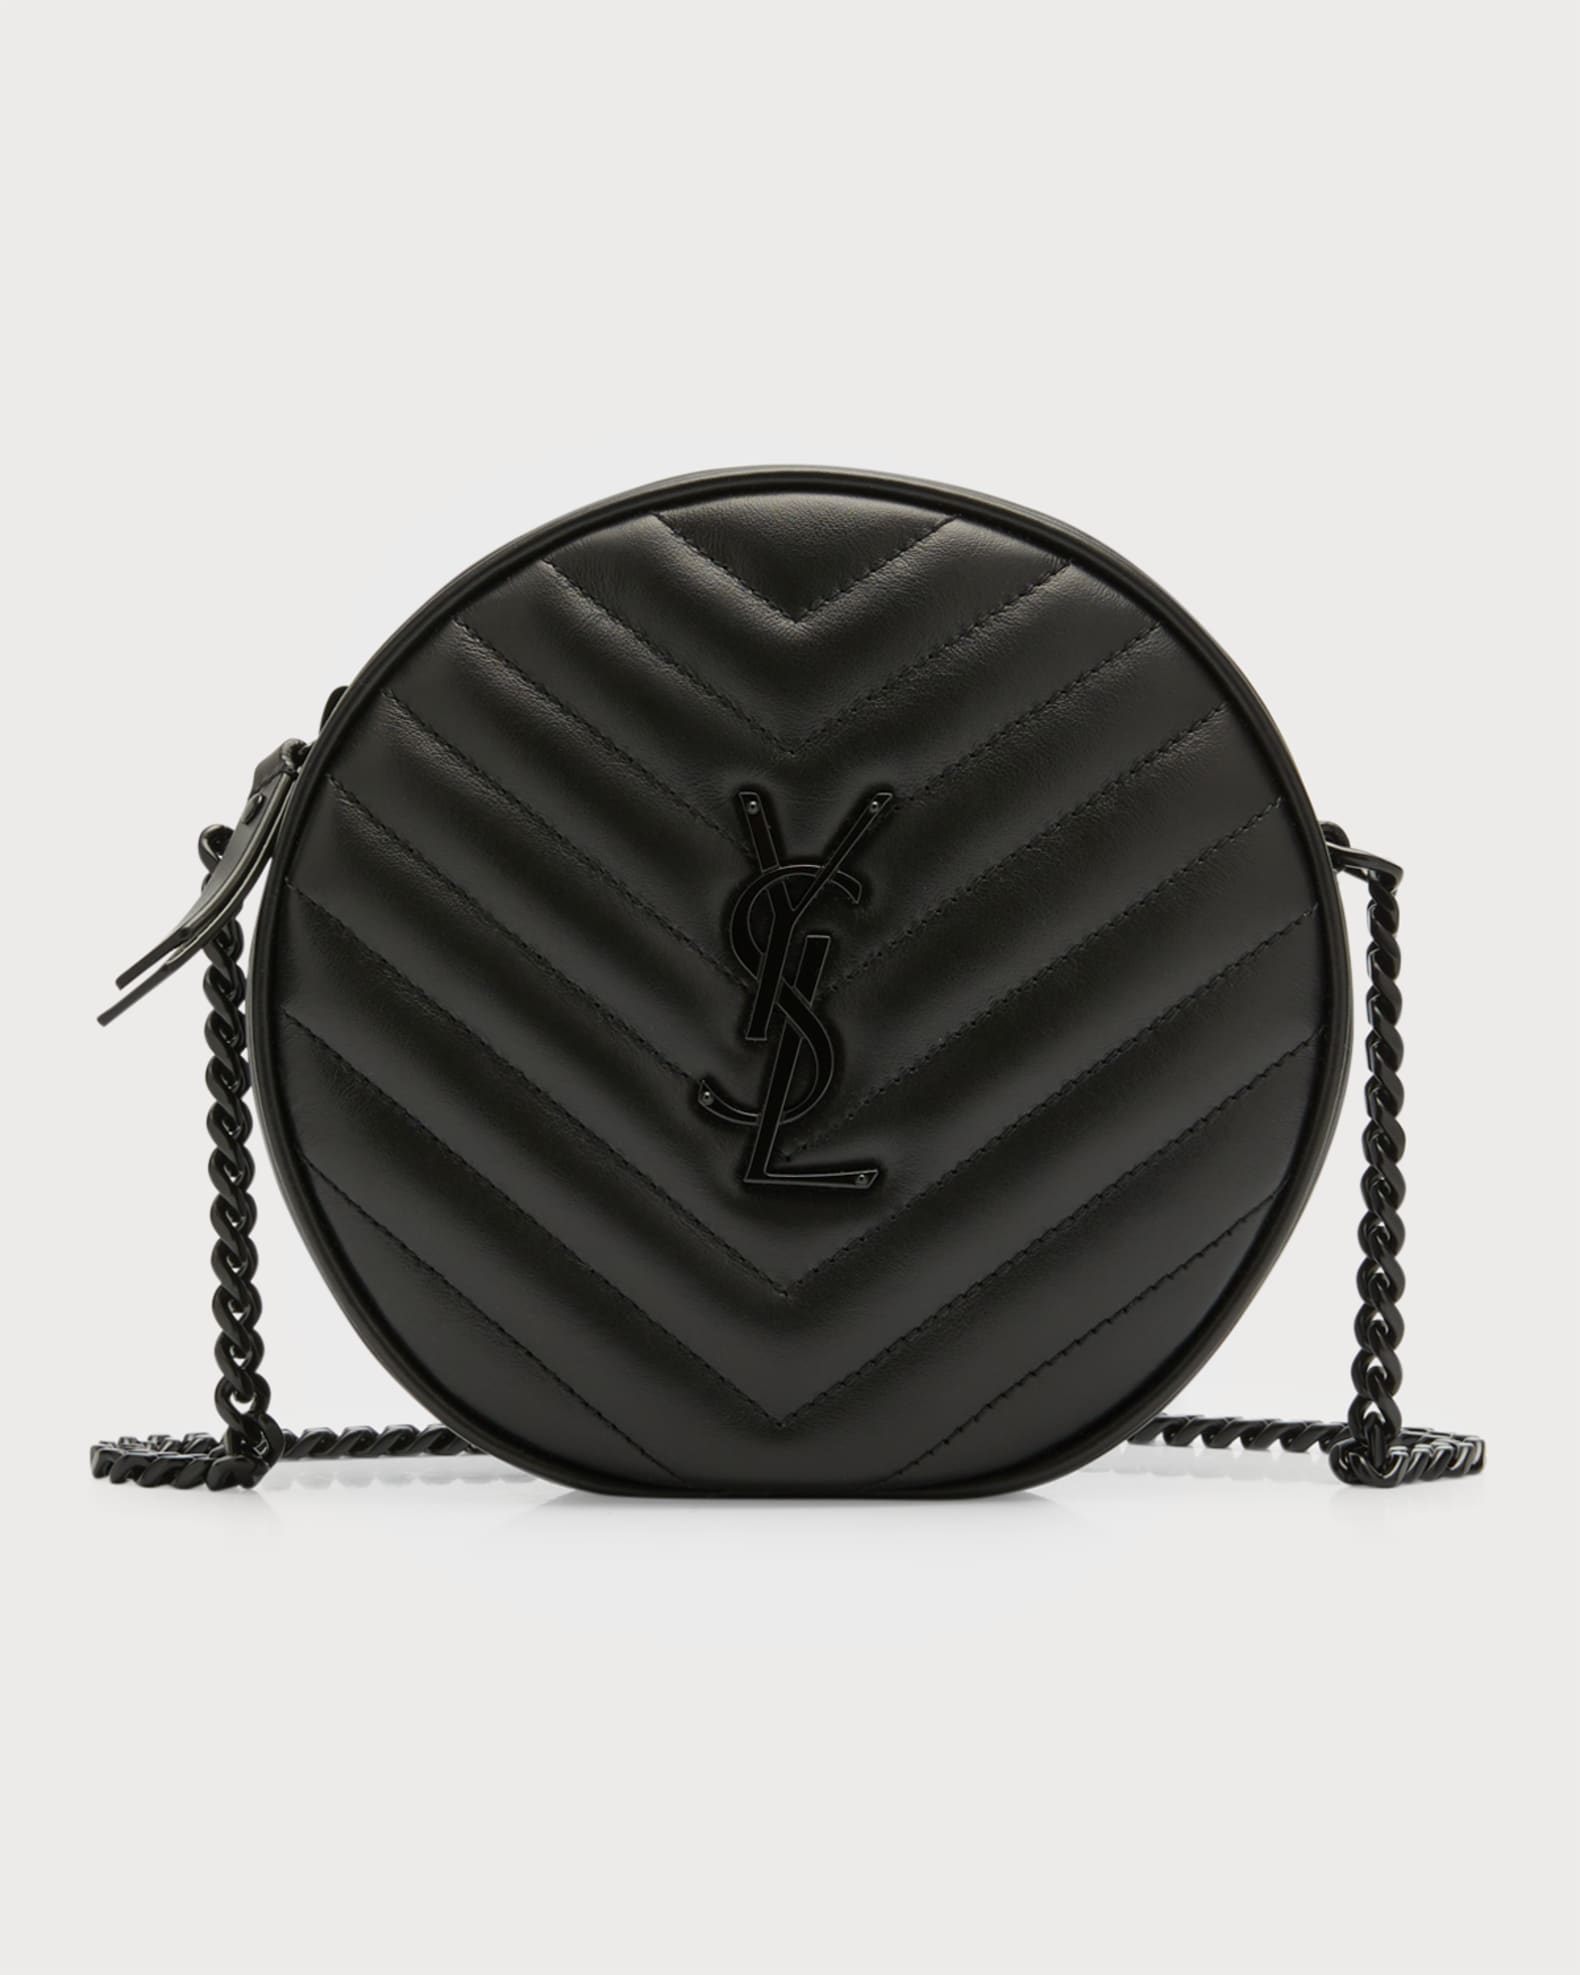 LOUIS VUITTON AT NEIMAN MARCUS - CLOSED - 12 Reviews